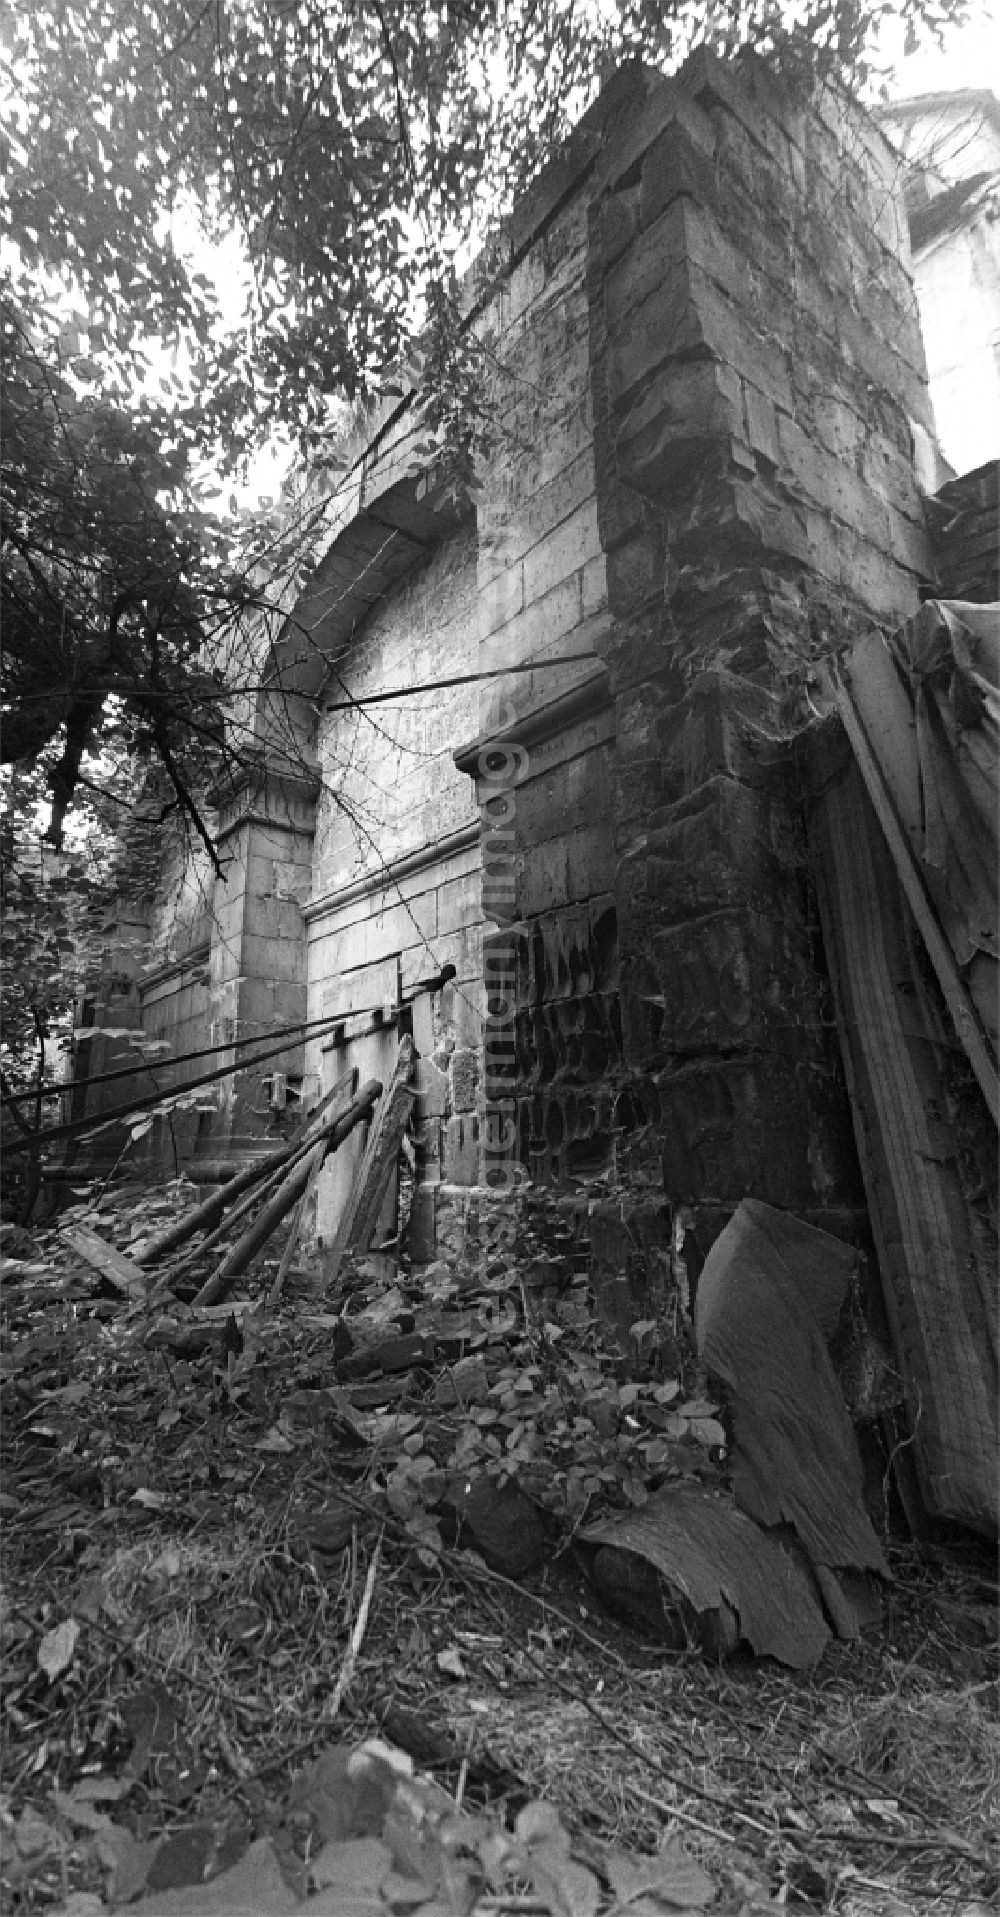 GDR image archive: Halberstadt - Debris and wall remains of the ruins of the synagogue on Bakenstrasse and Judenstrasse in Halberstadt in the state Saxony-Anhalt on the territory of the former GDR, German Democratic Republic